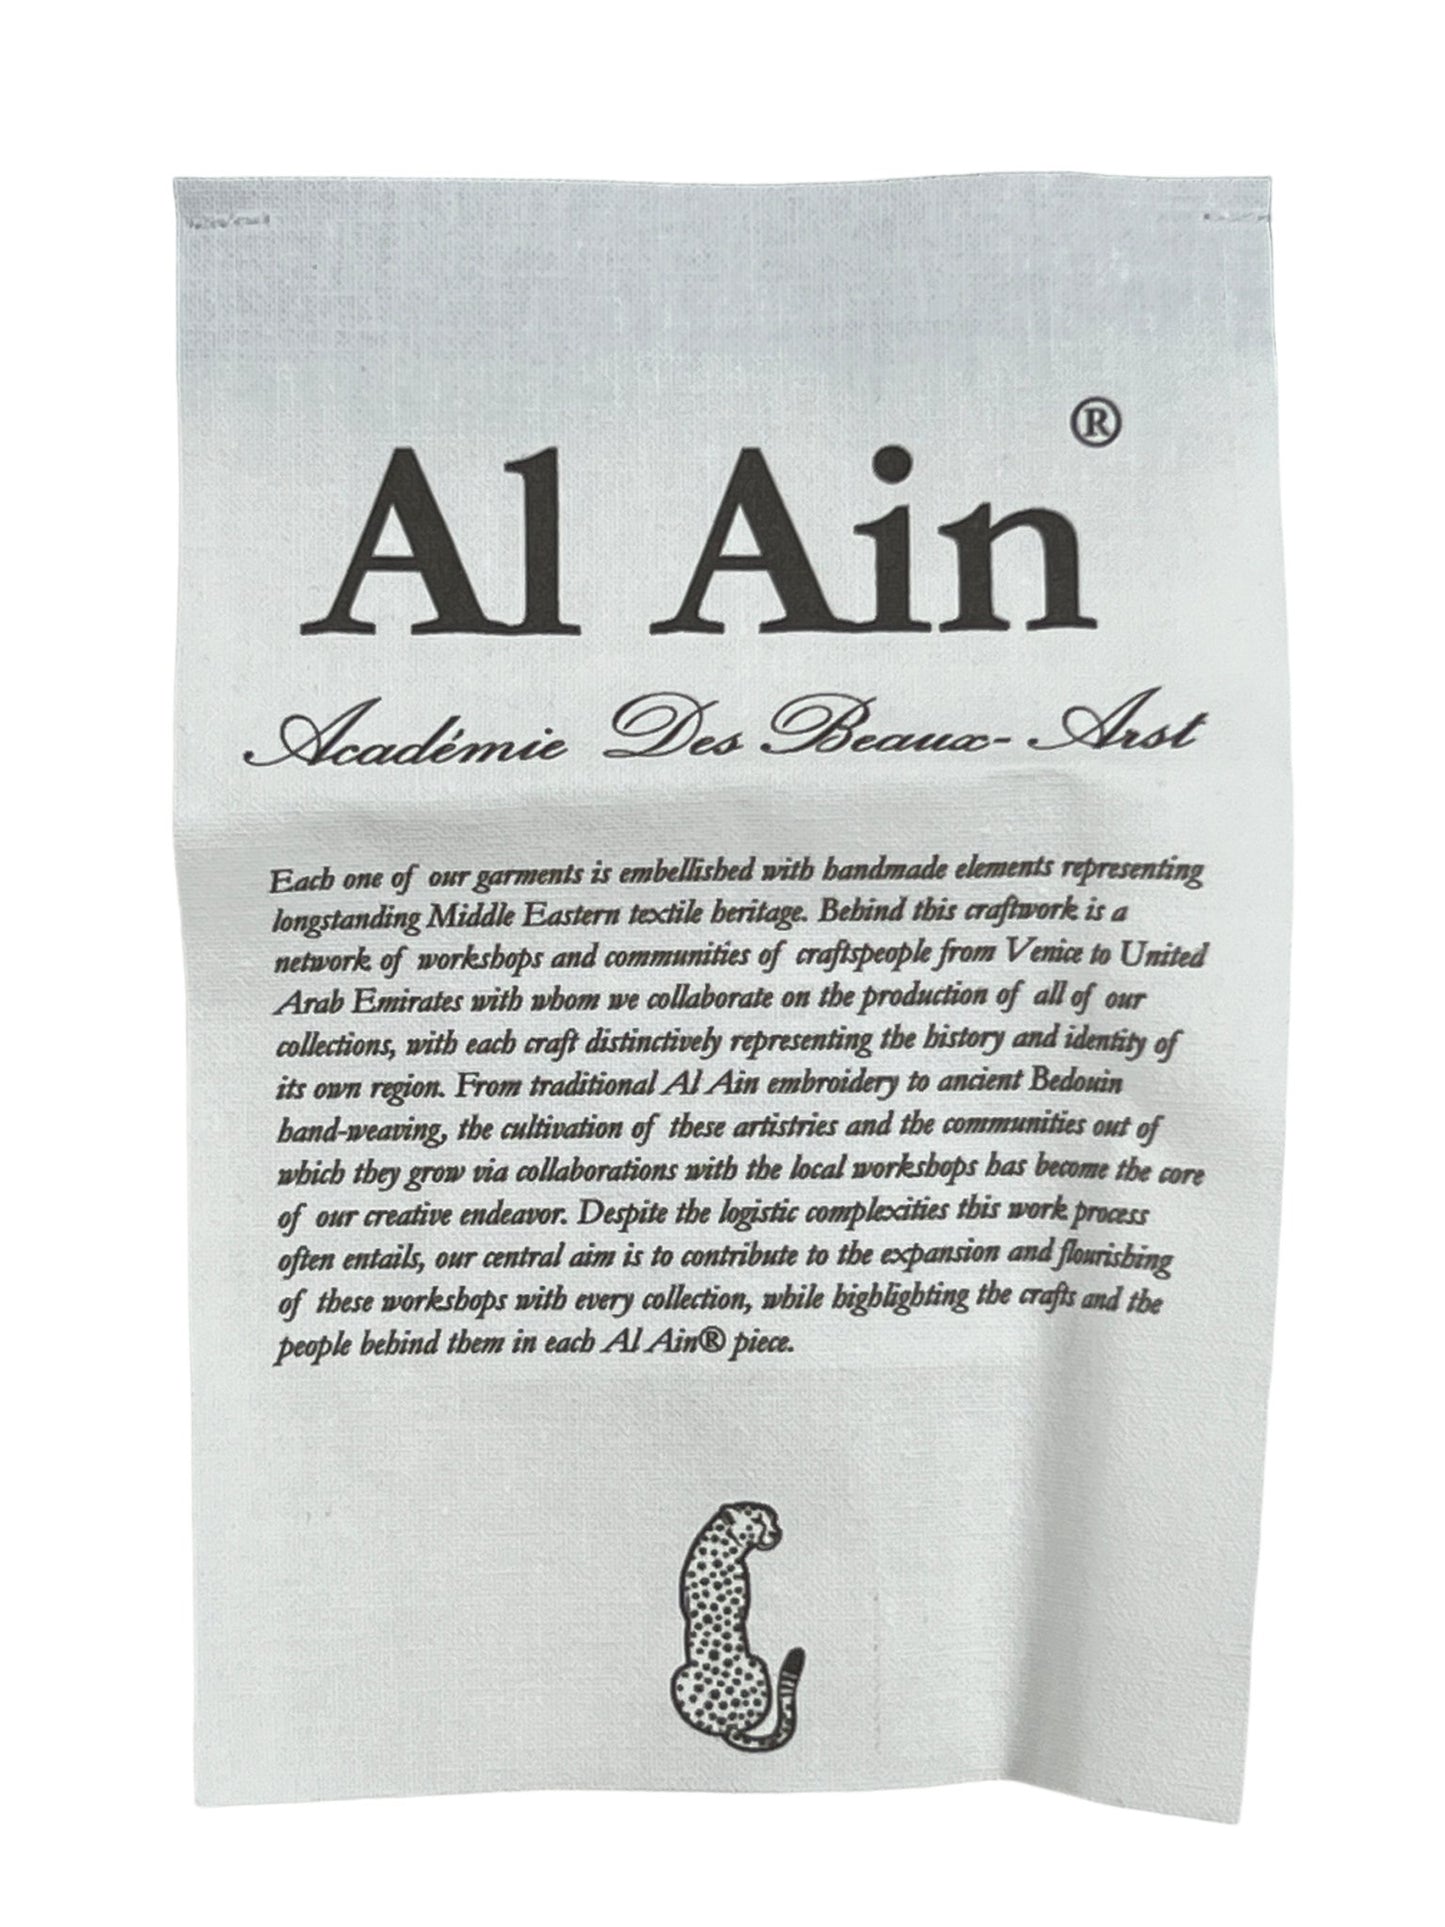 Label featuring elegant script and logo on a thick rope texture background, titled "AL AIN AHOX S108 POUVOIR OCRE," with a detailed description in English and a Middle Eastern style snake illustration.